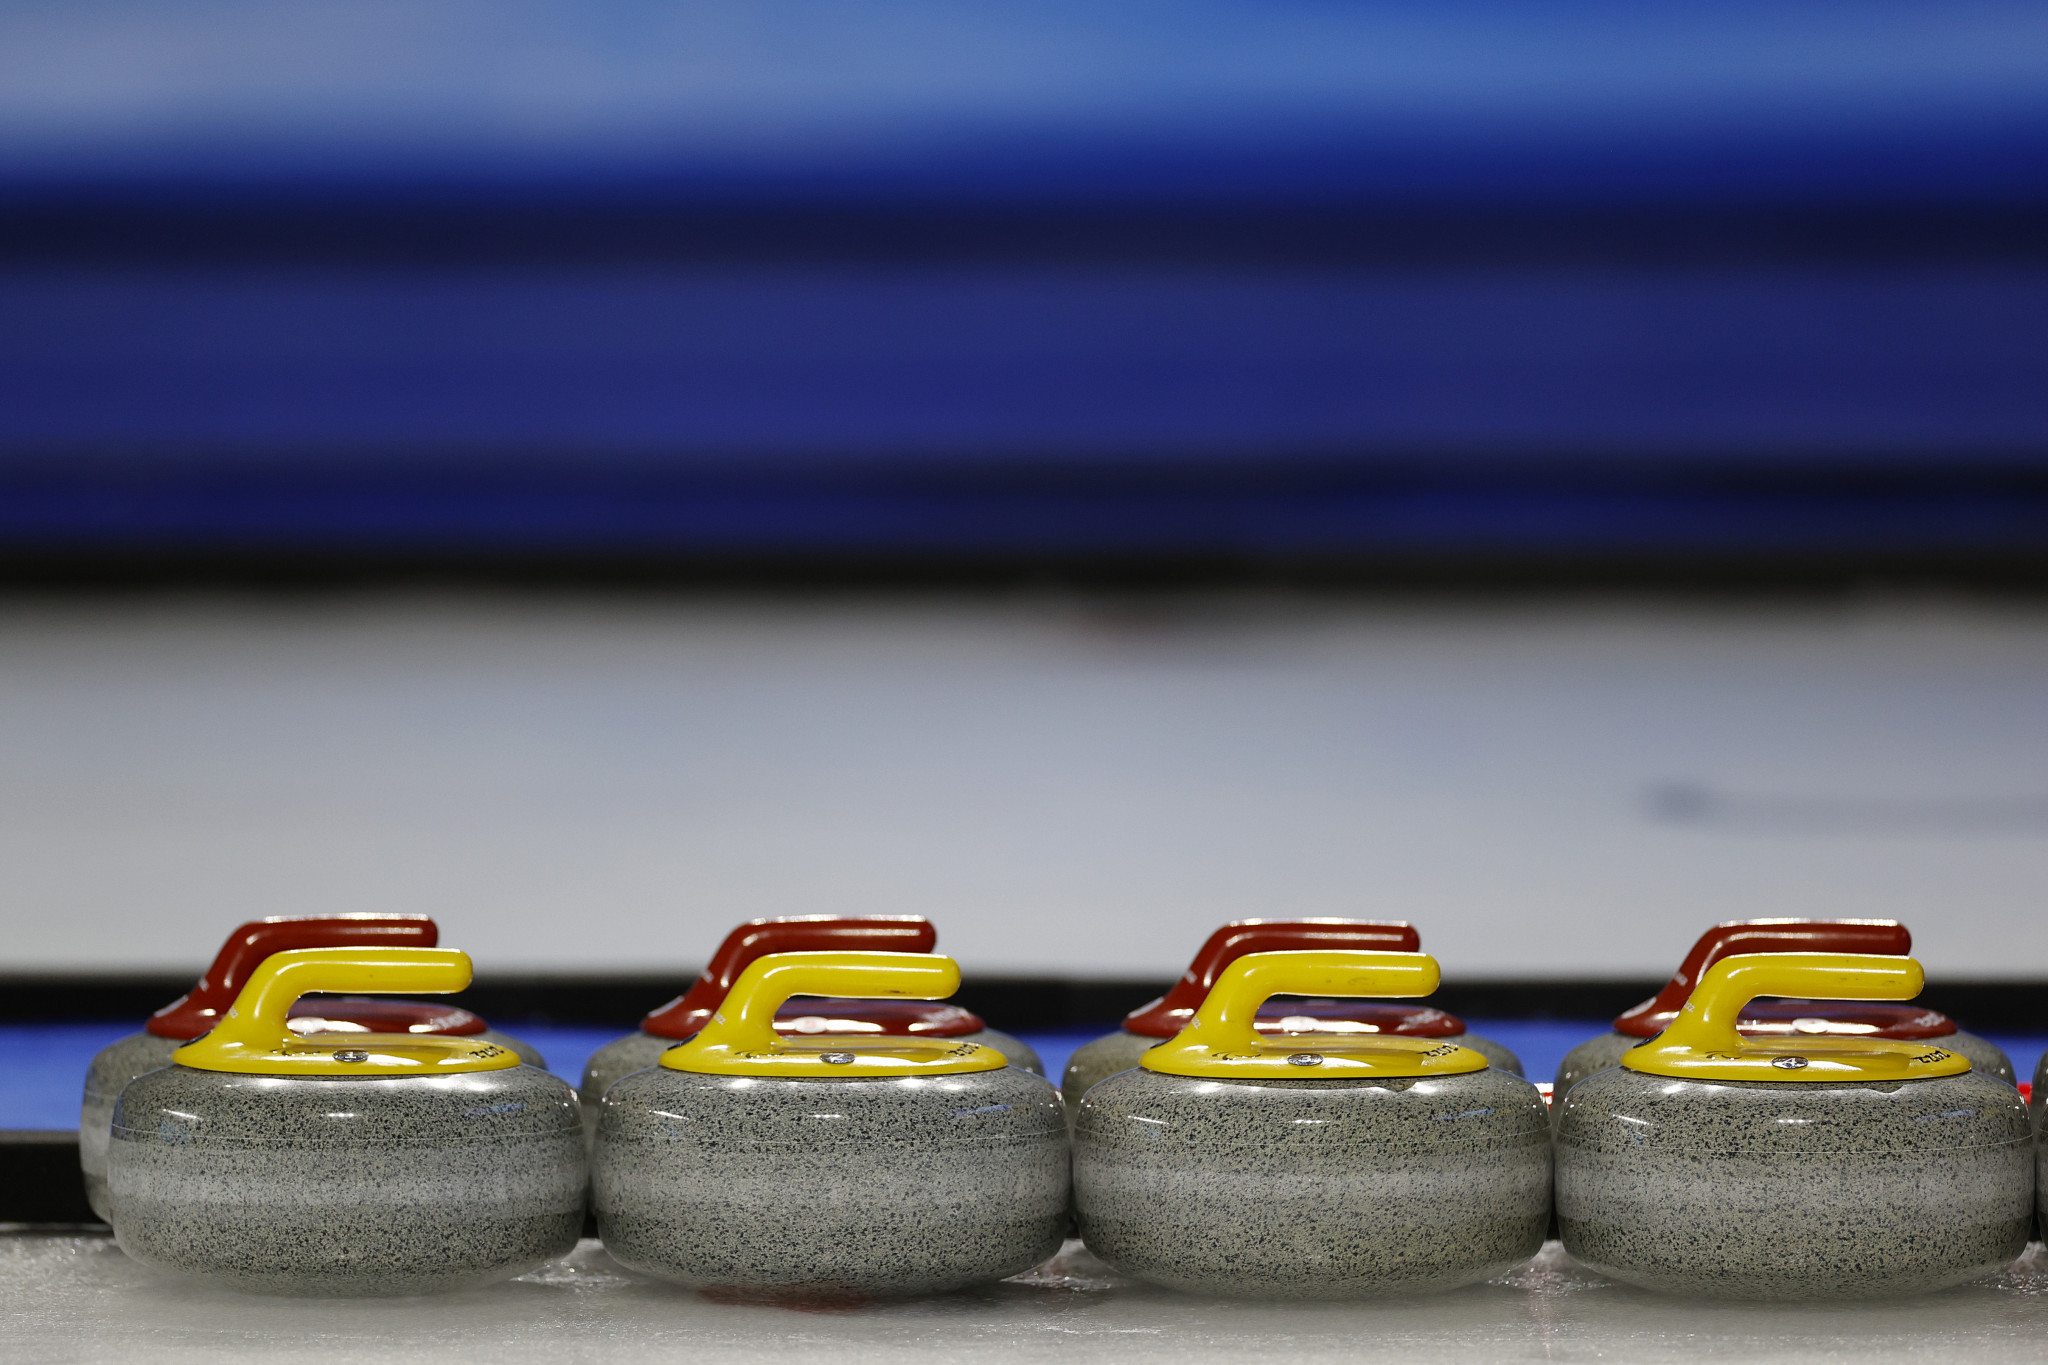 The Polish Curling Association was suspended for "bringing the sport into disrepute" in 2020 ©Getty Images